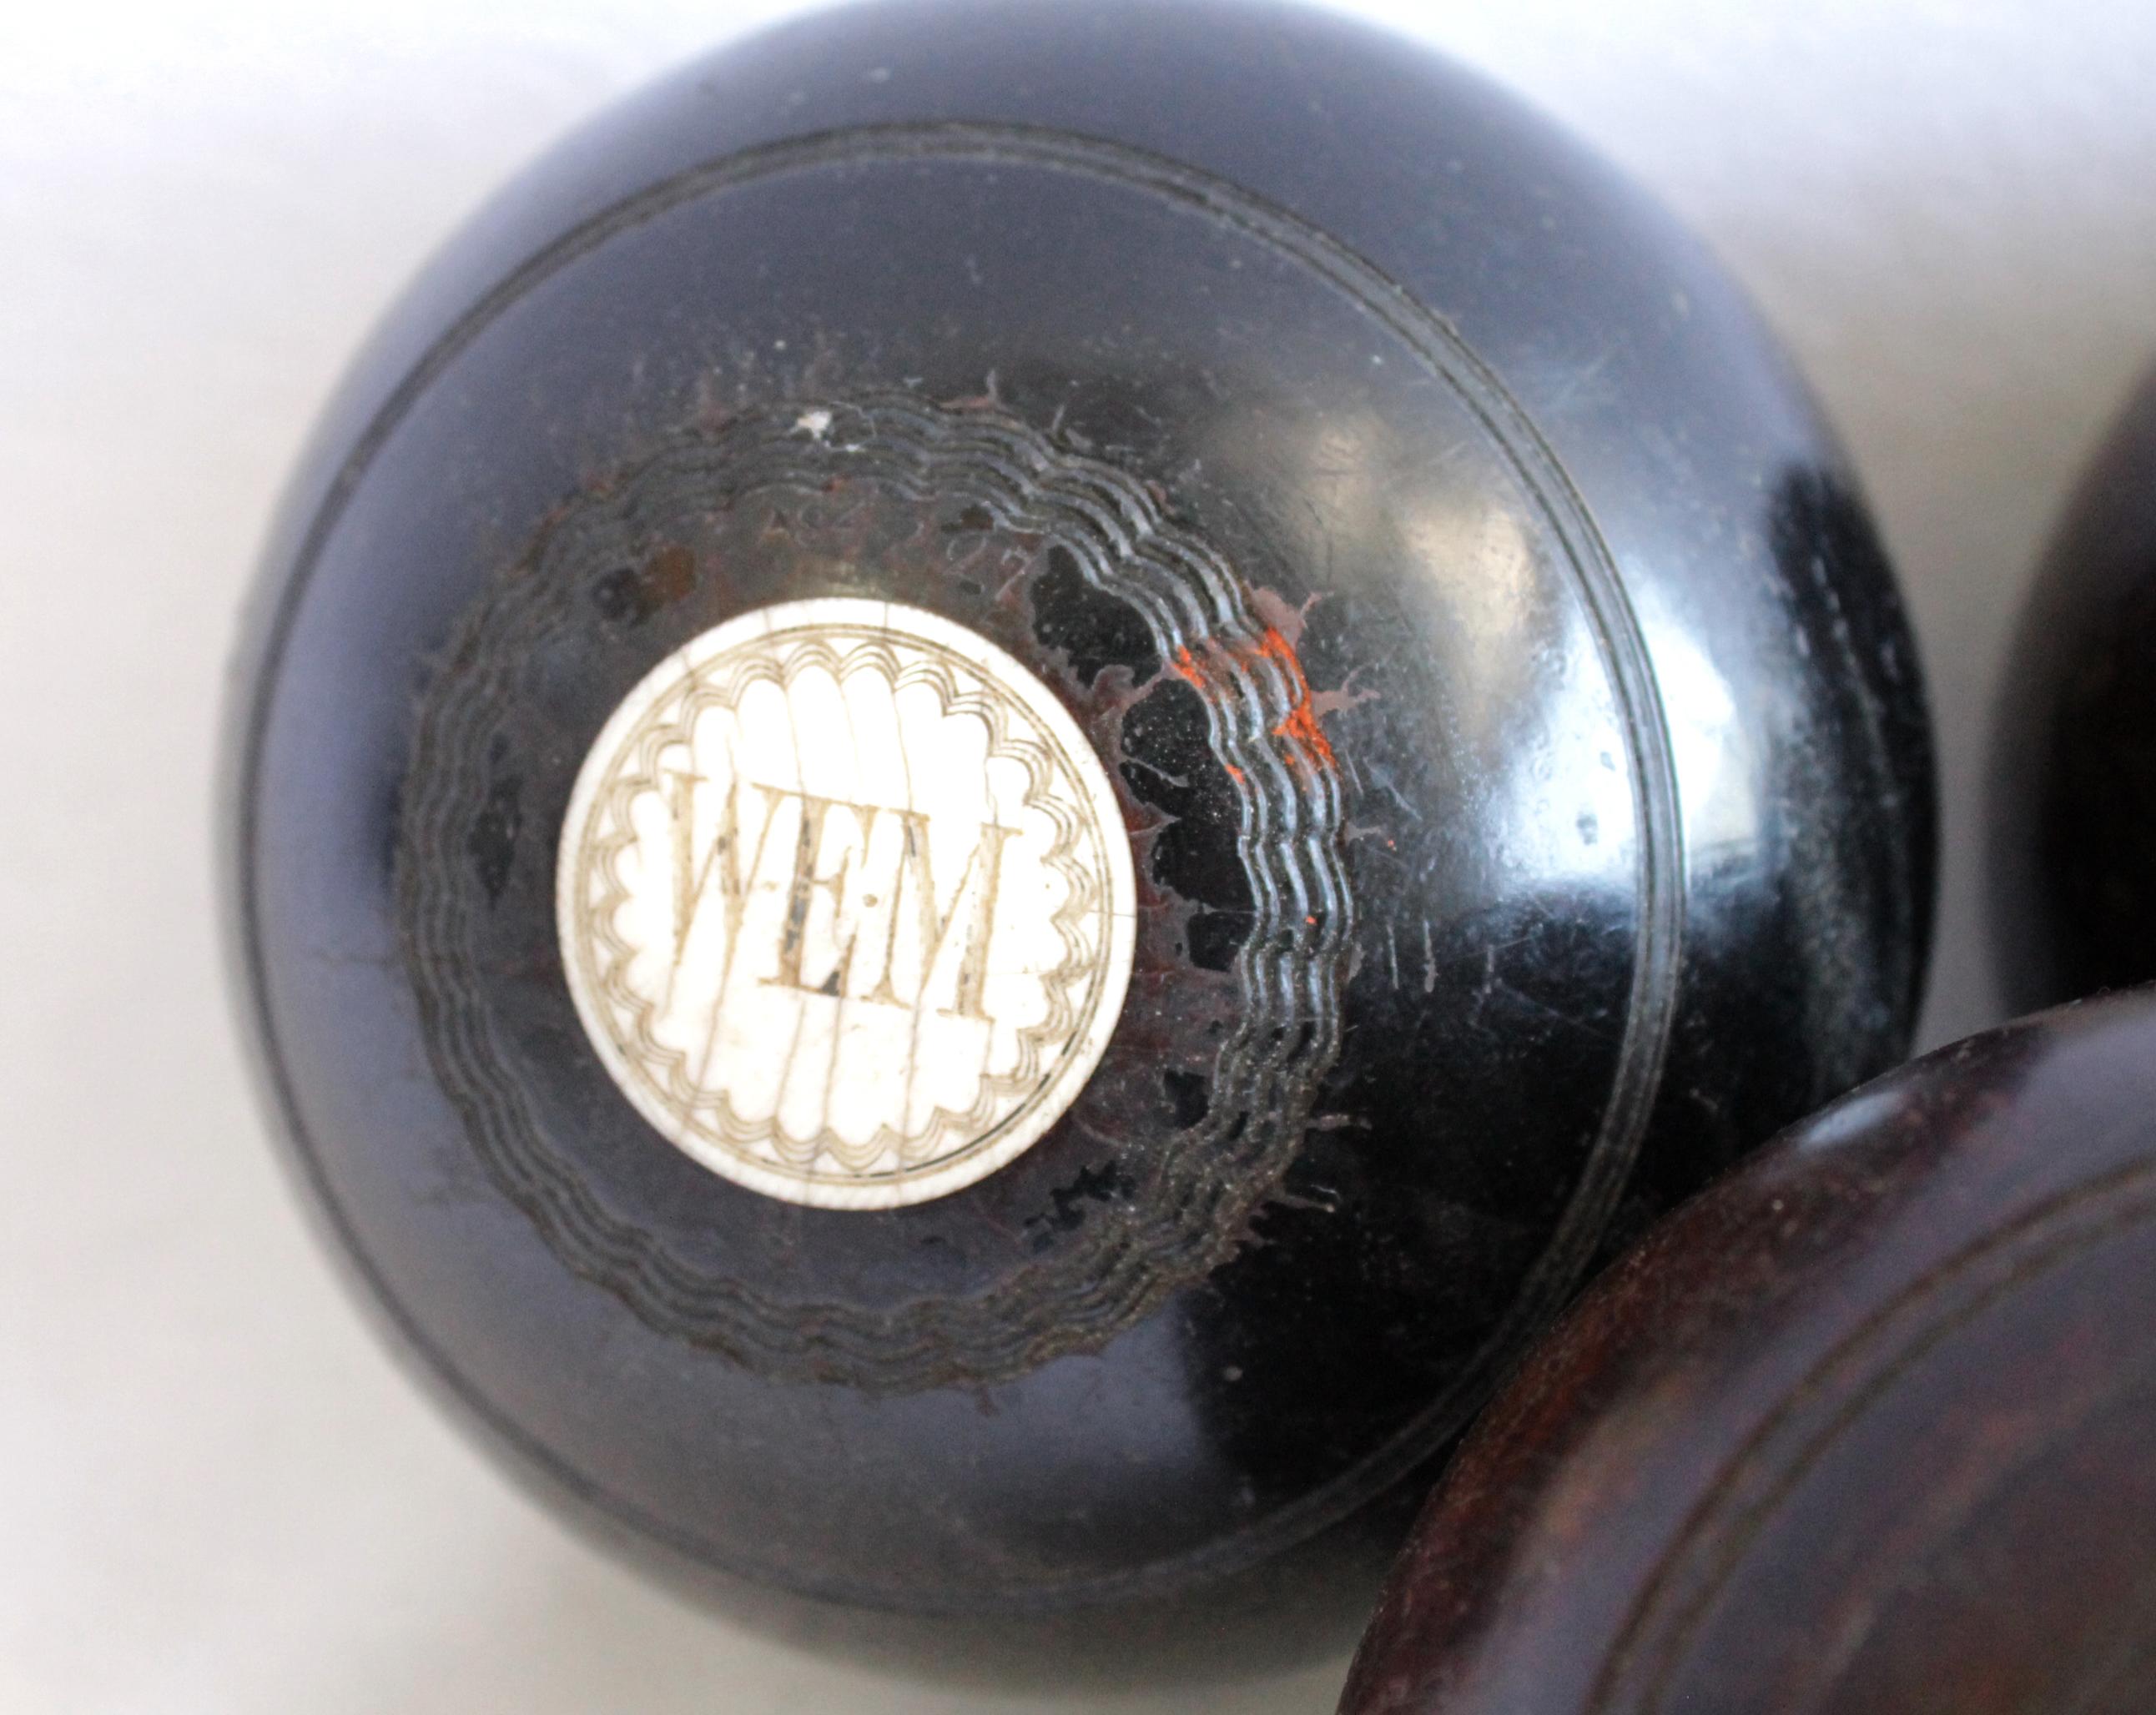 Antique Wooden Lawn Bowling Balls with Monograms